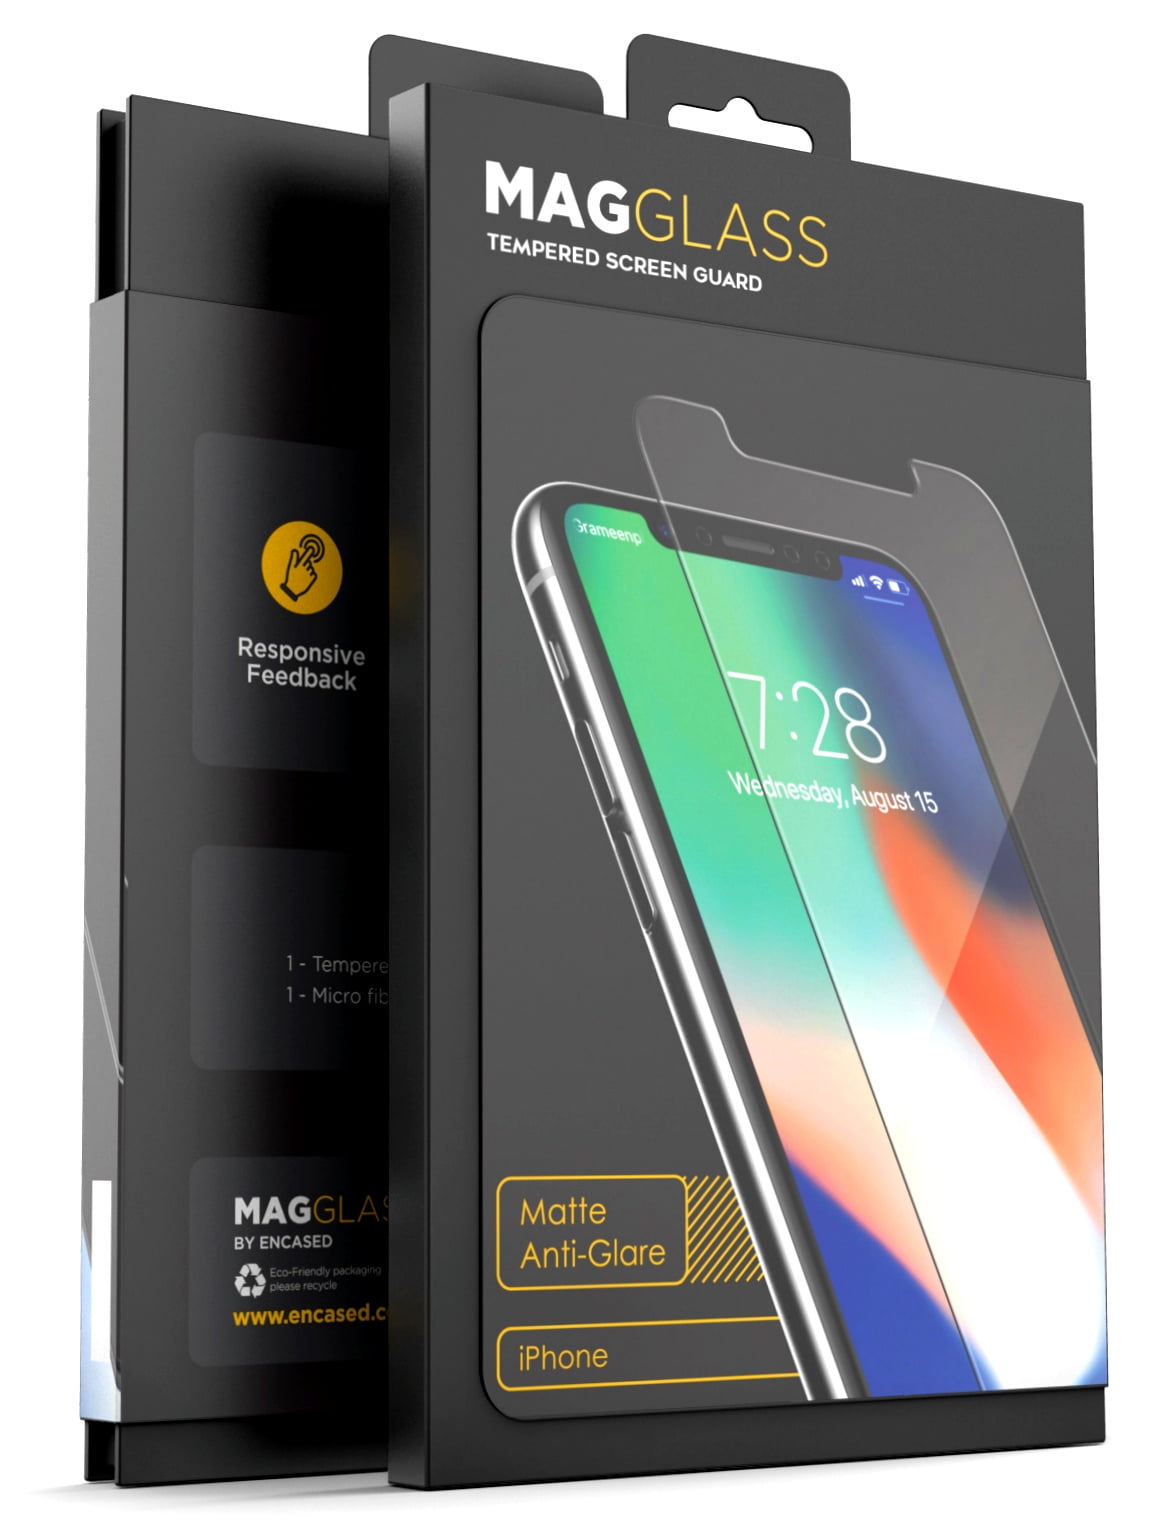 upscreen Reflection Shield Matte Screen Protector for Nikon F6 Multitouch Optimized Strong Scratch Protection Matte and Anti-Glare